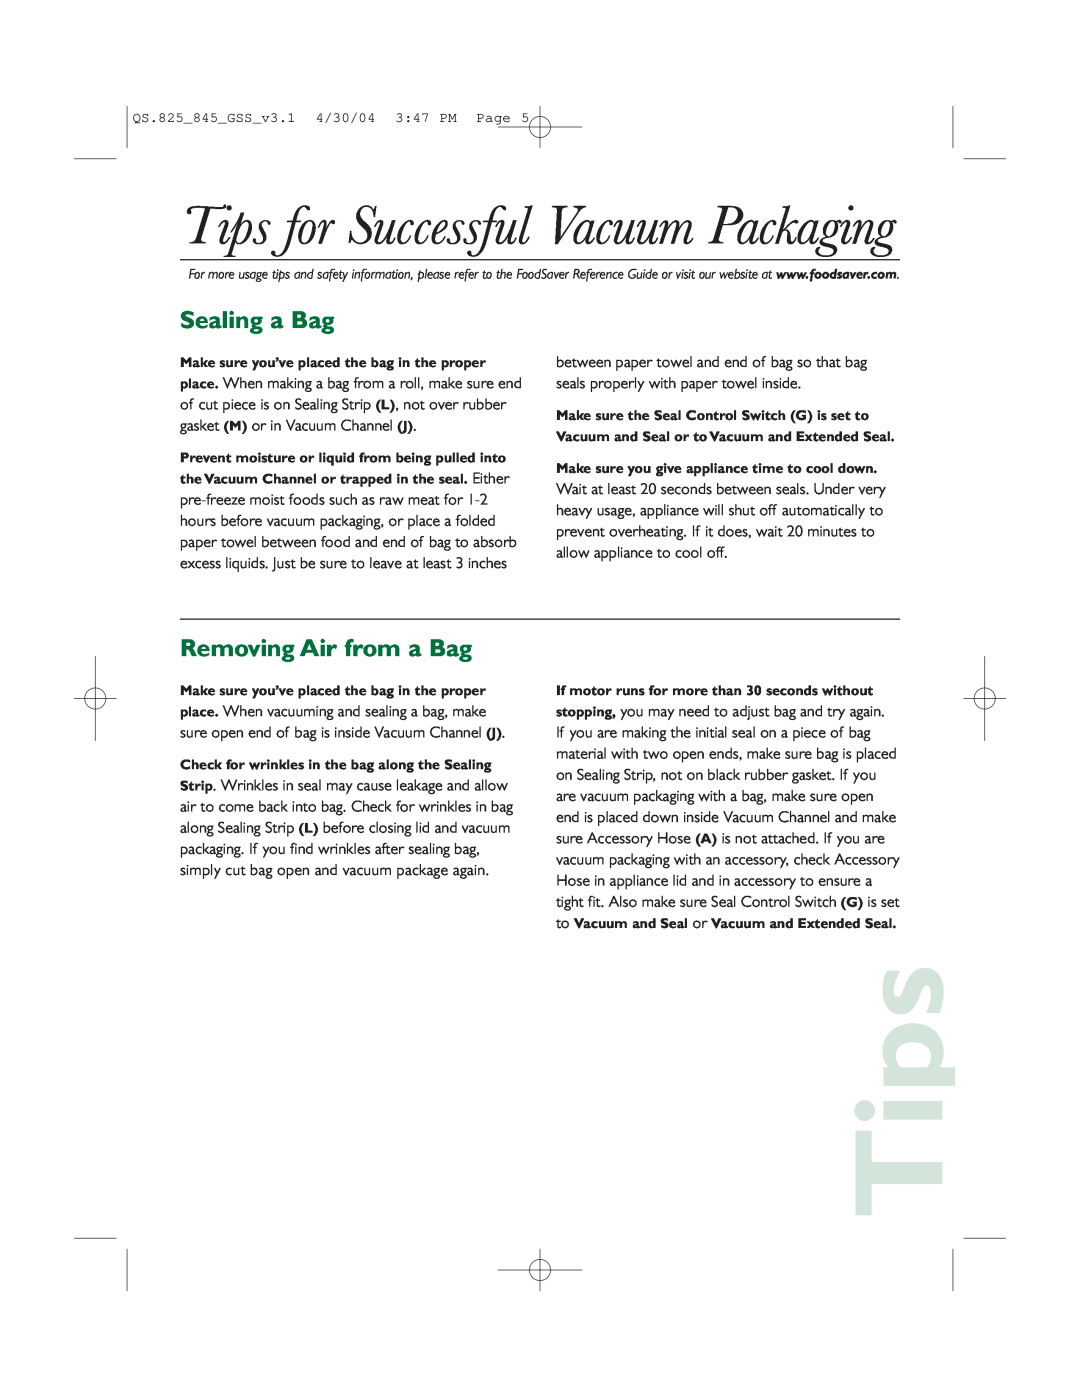 FoodSaver v825, V845 quick start Tips for Successful Vacuum Packaging, Sealing a Bag, Removing Air from a Bag 